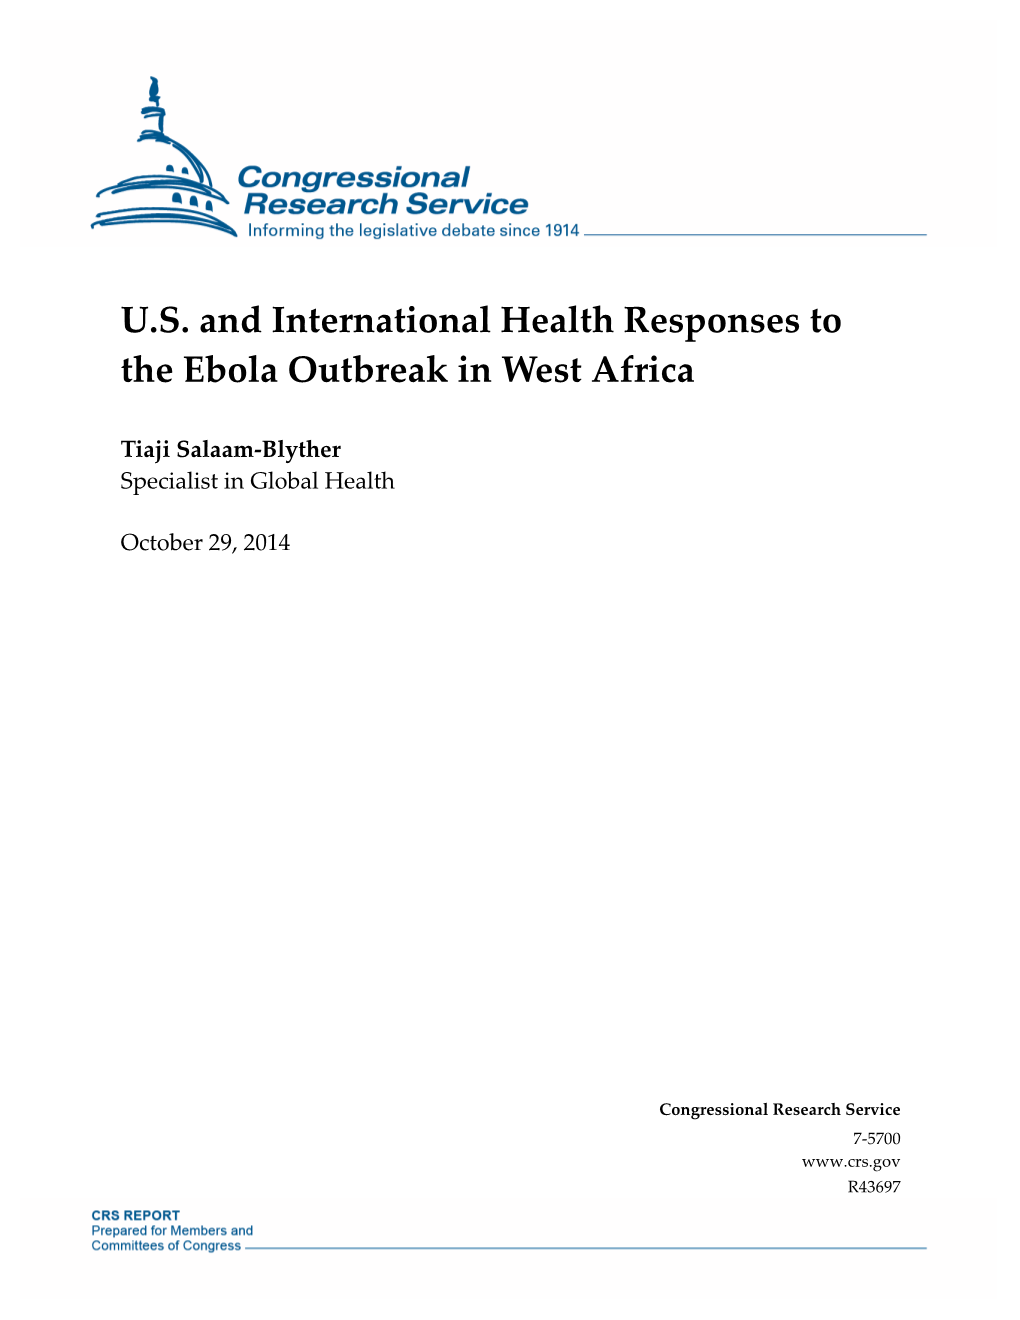 U.S. and International Health Responses to the Ebola Outbreak in West Africa